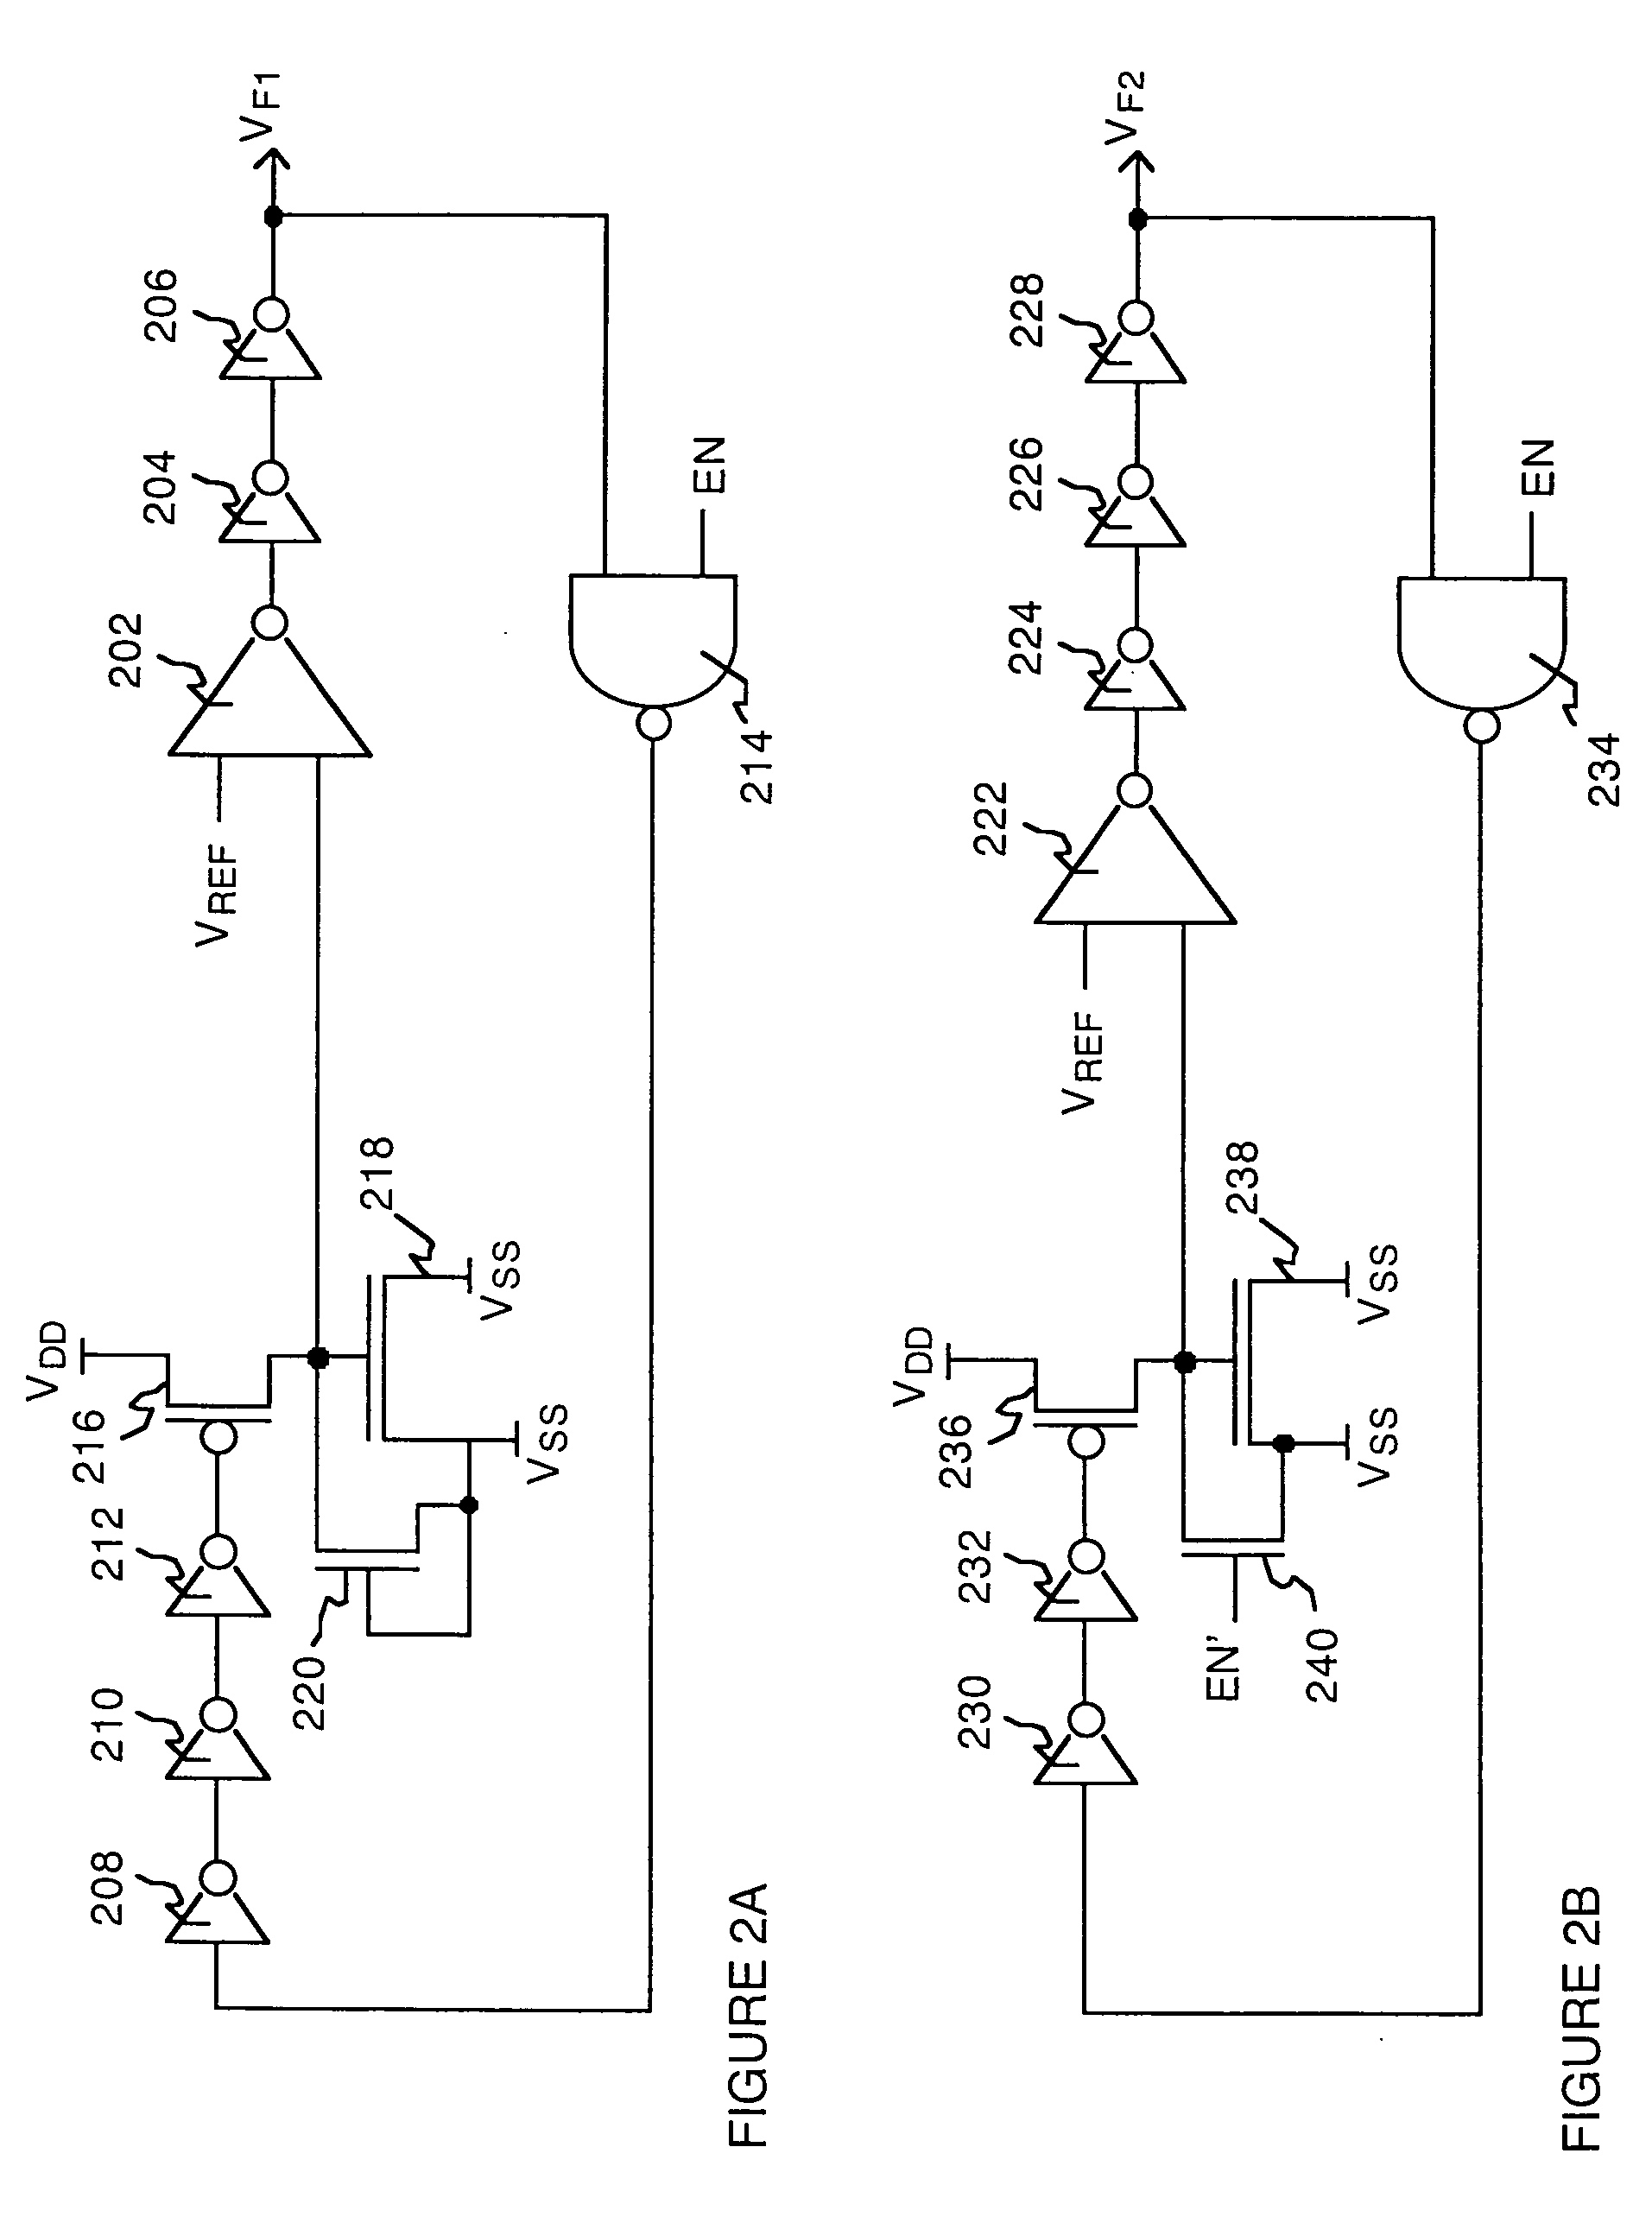 System and method for measuring time dependent dielectric breakdown with a ring oscillator